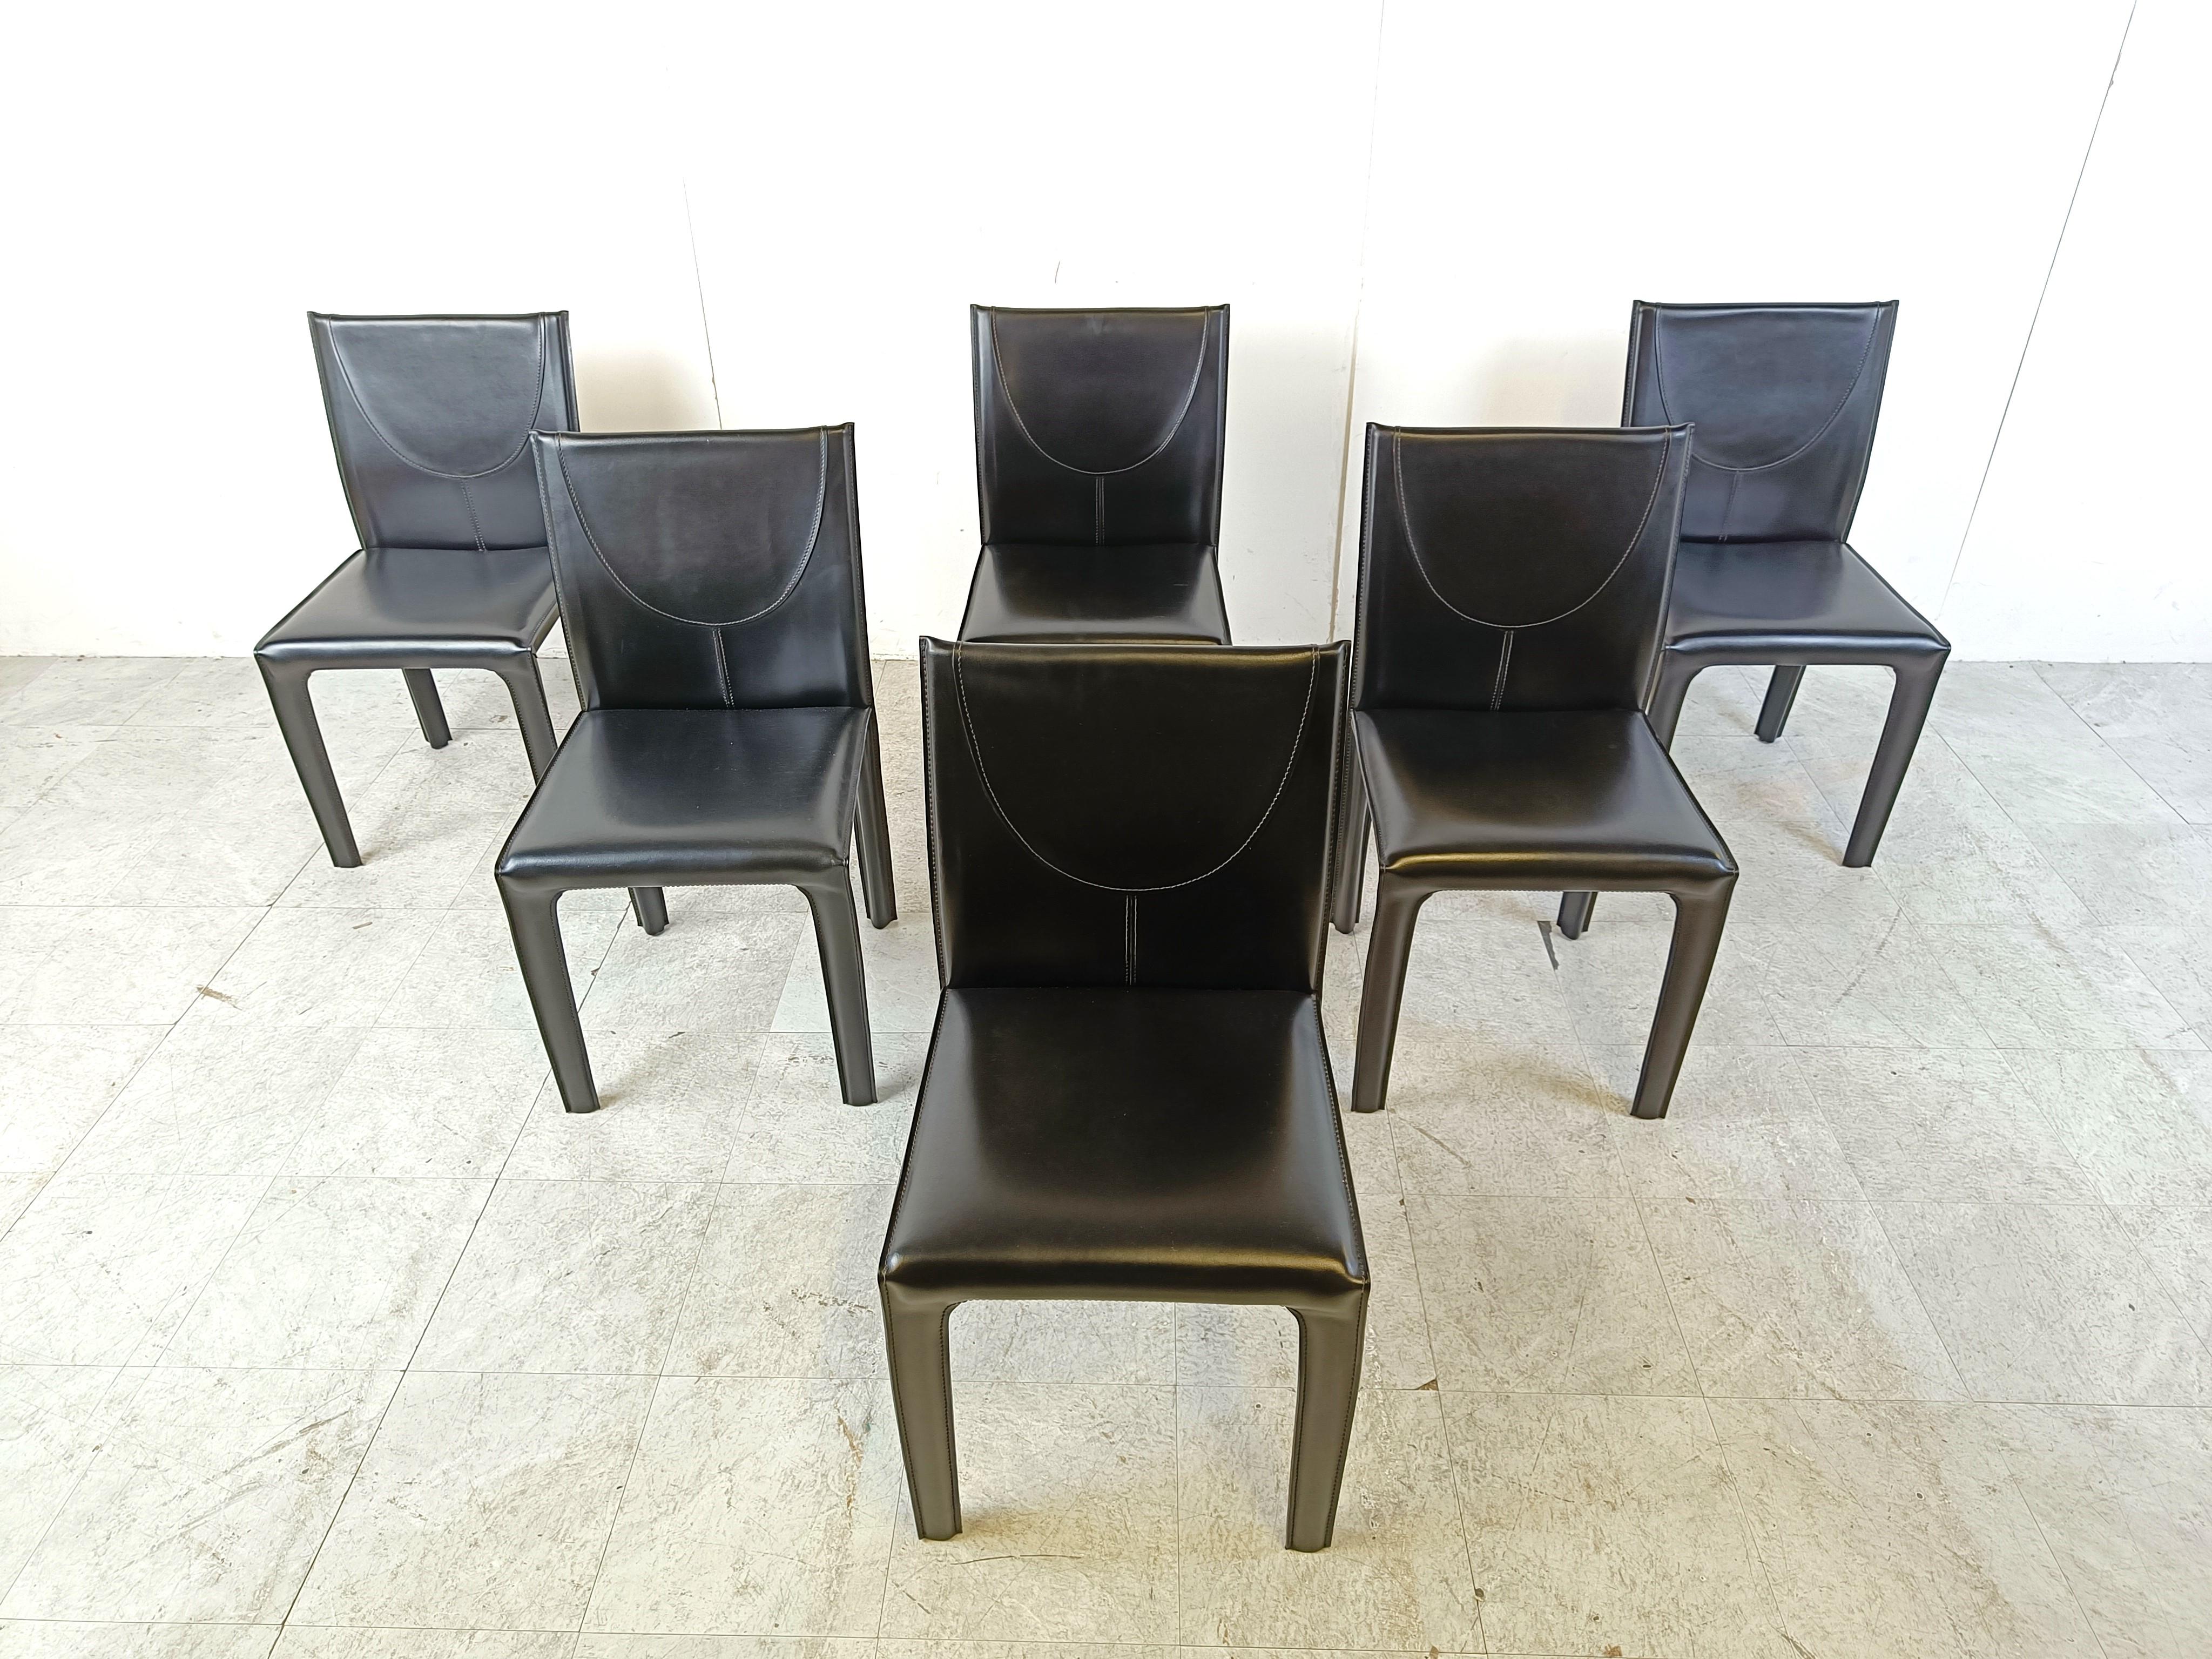 Set of 6 black sttiched leather dining chairs by Arper Italy.

Very sturdy and timeless design chairs.

Condition as nerw, very well maintained by the previous owner

1980s - Italy

Dimensions:
Height: 85cm/33.46